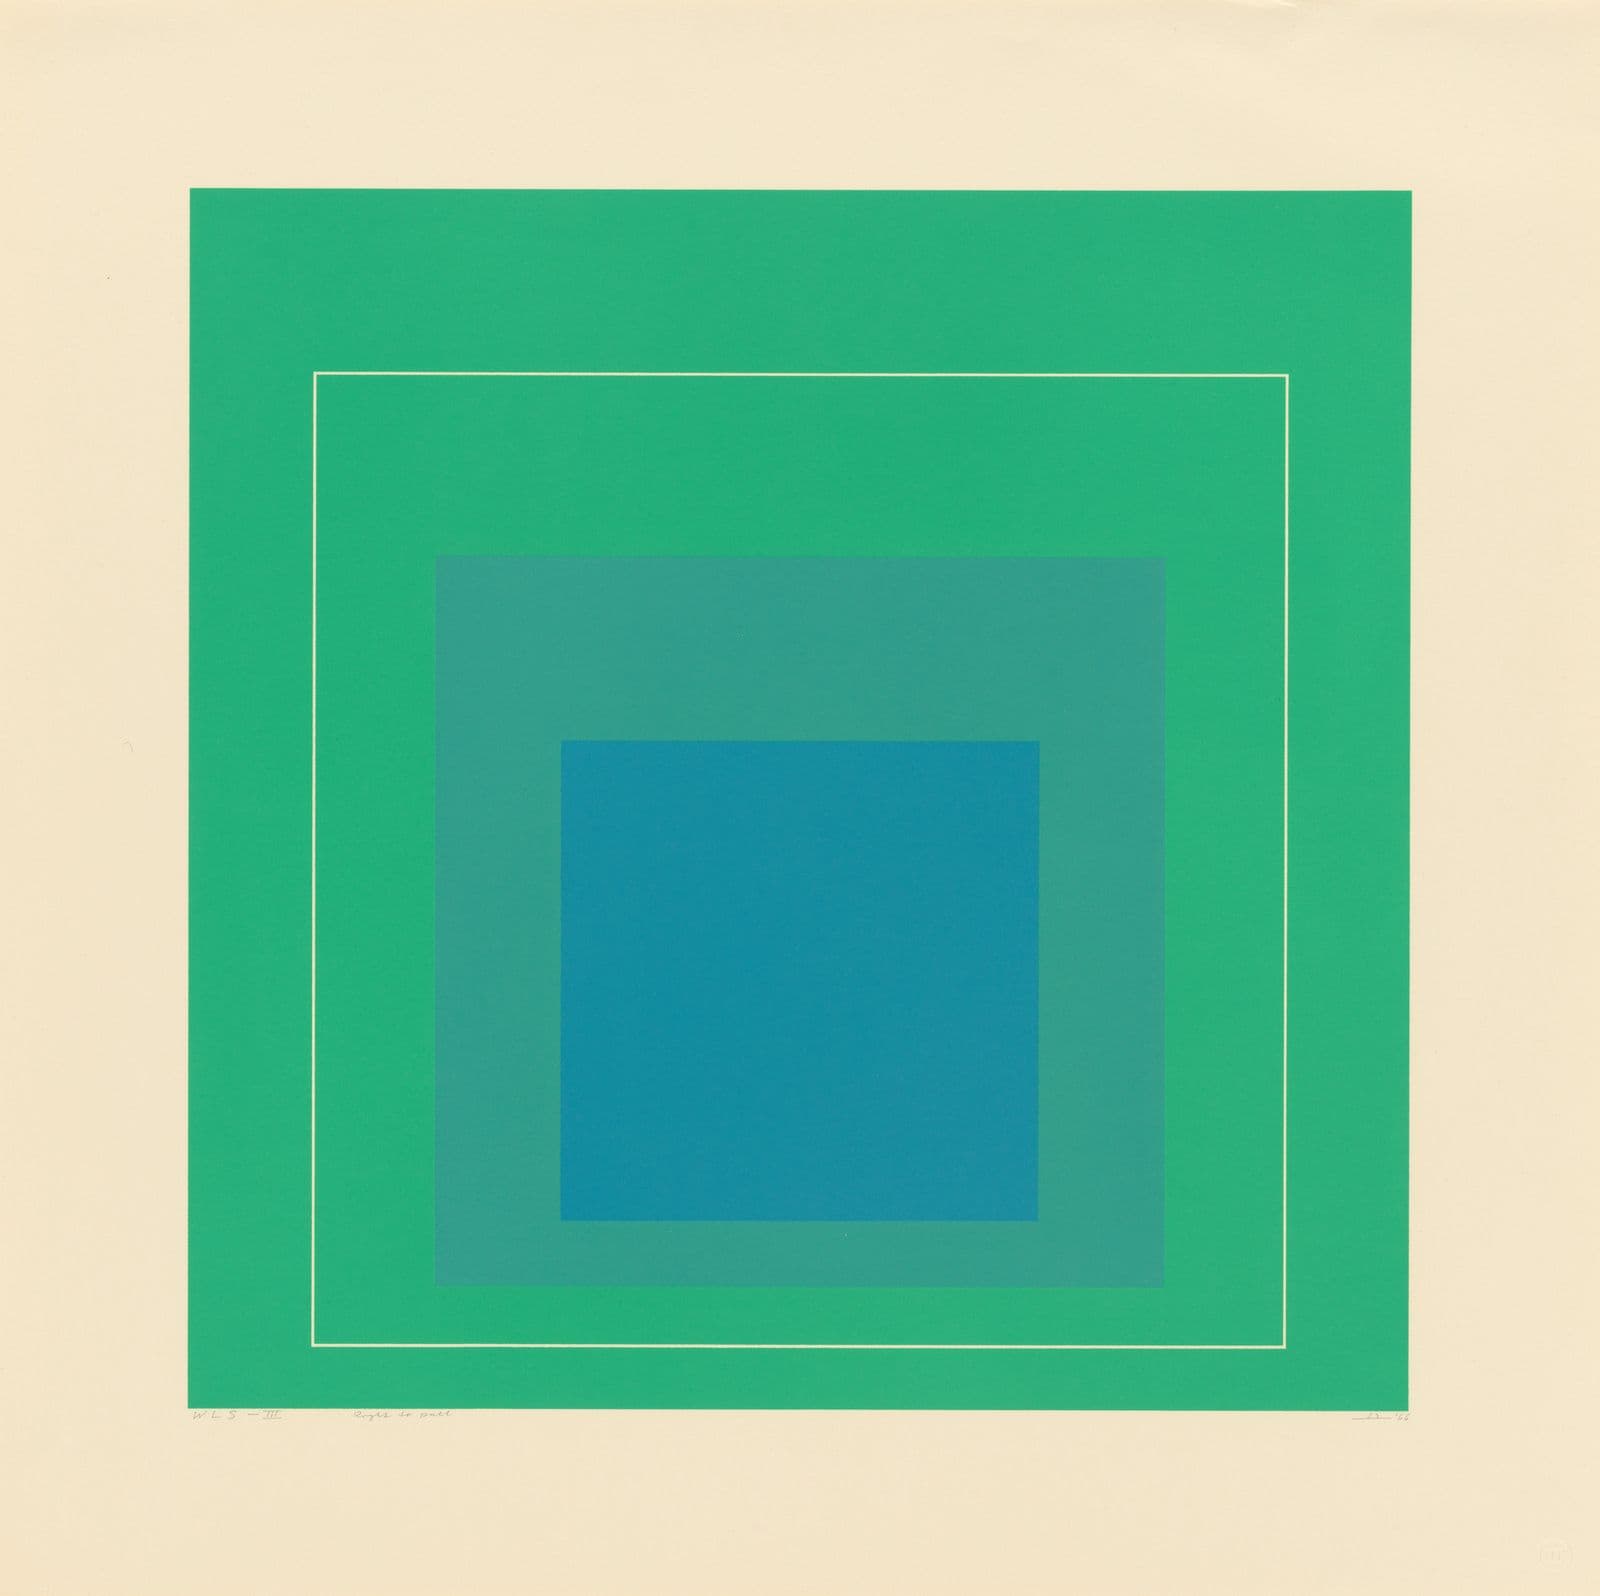 A chromatic composition of green squares